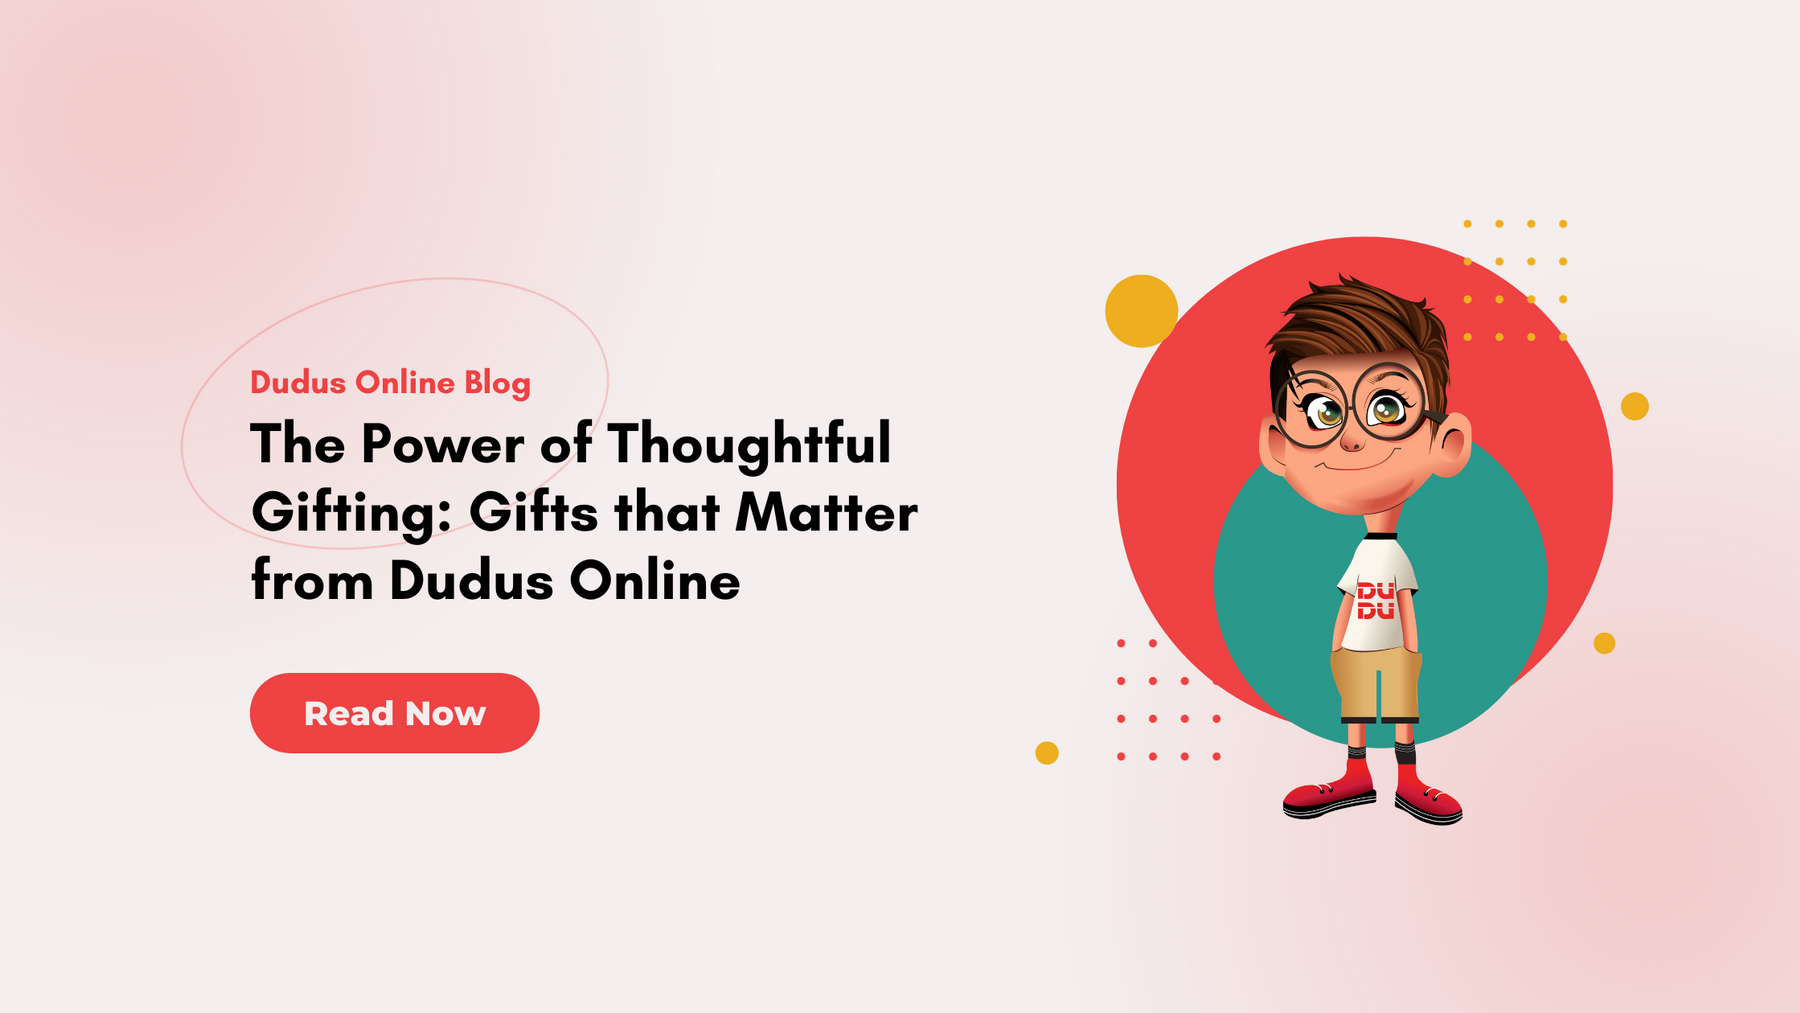 The Power of Thoughtful Gifting: Gifts that Matter from Dudus Online